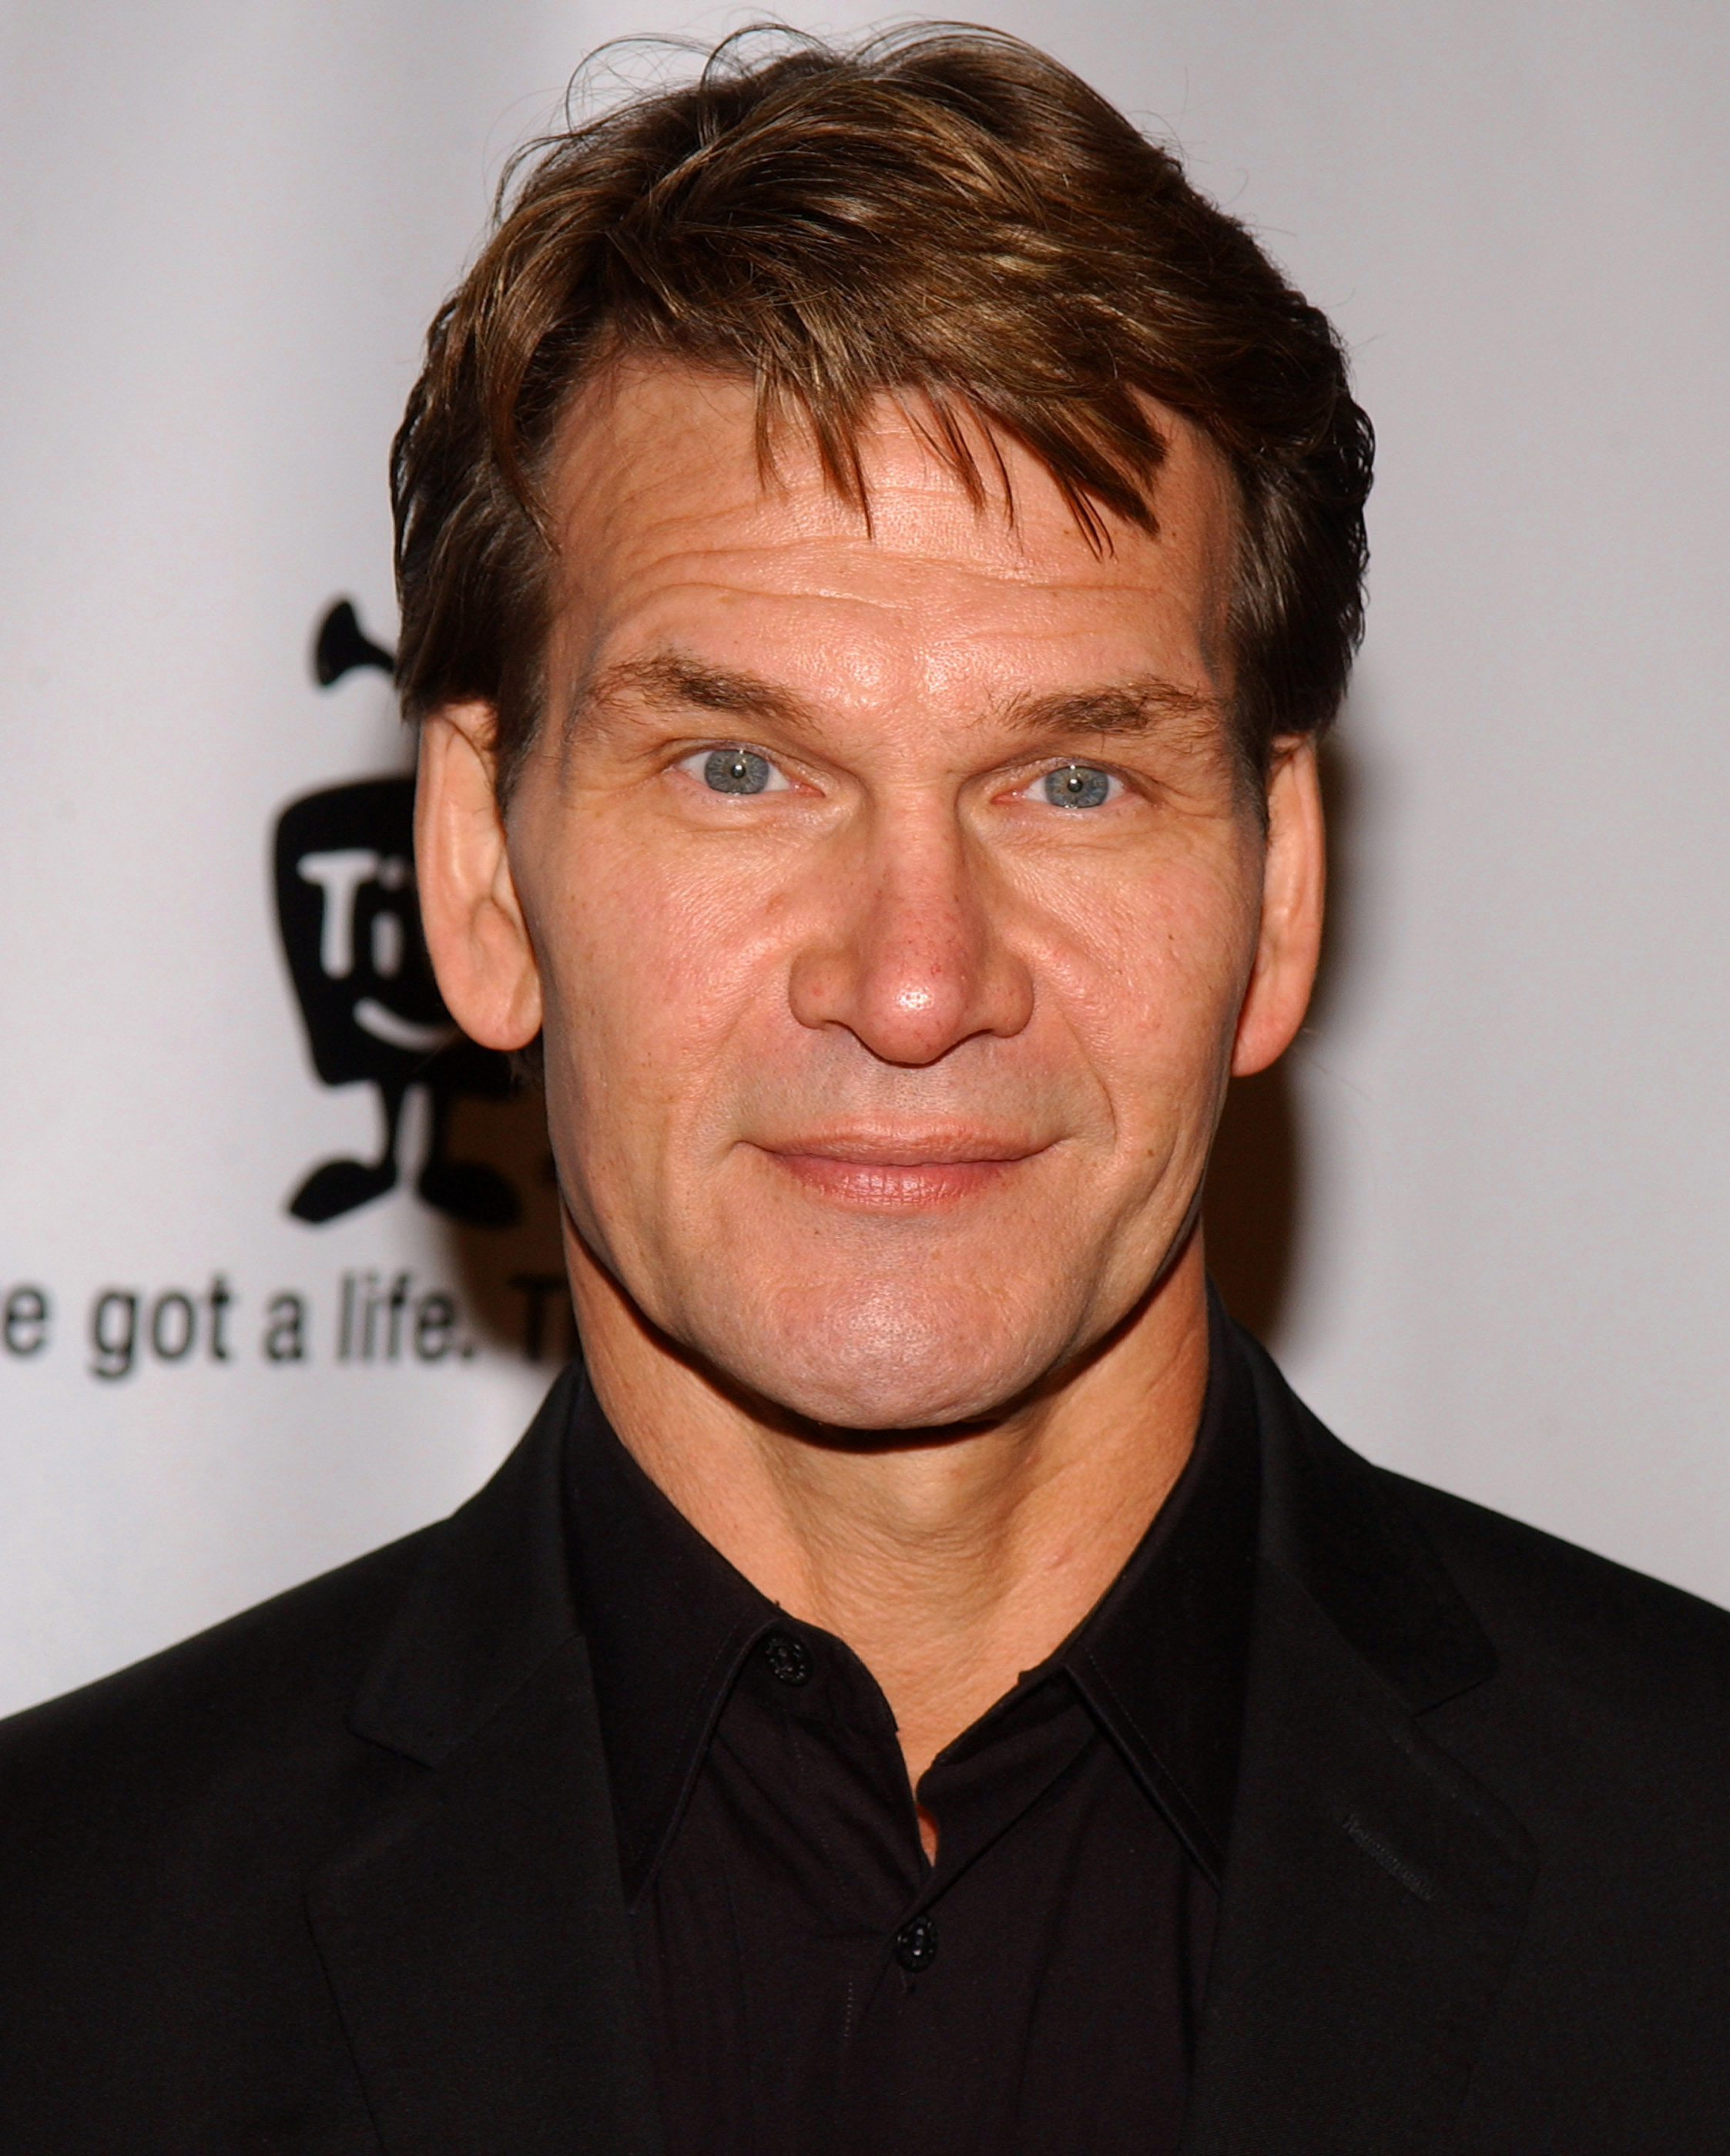 Patrick Swayze during Oceana's 2004 Partners Awards Gala in Beverly Hills, California in 2004 | Source: Getty Images